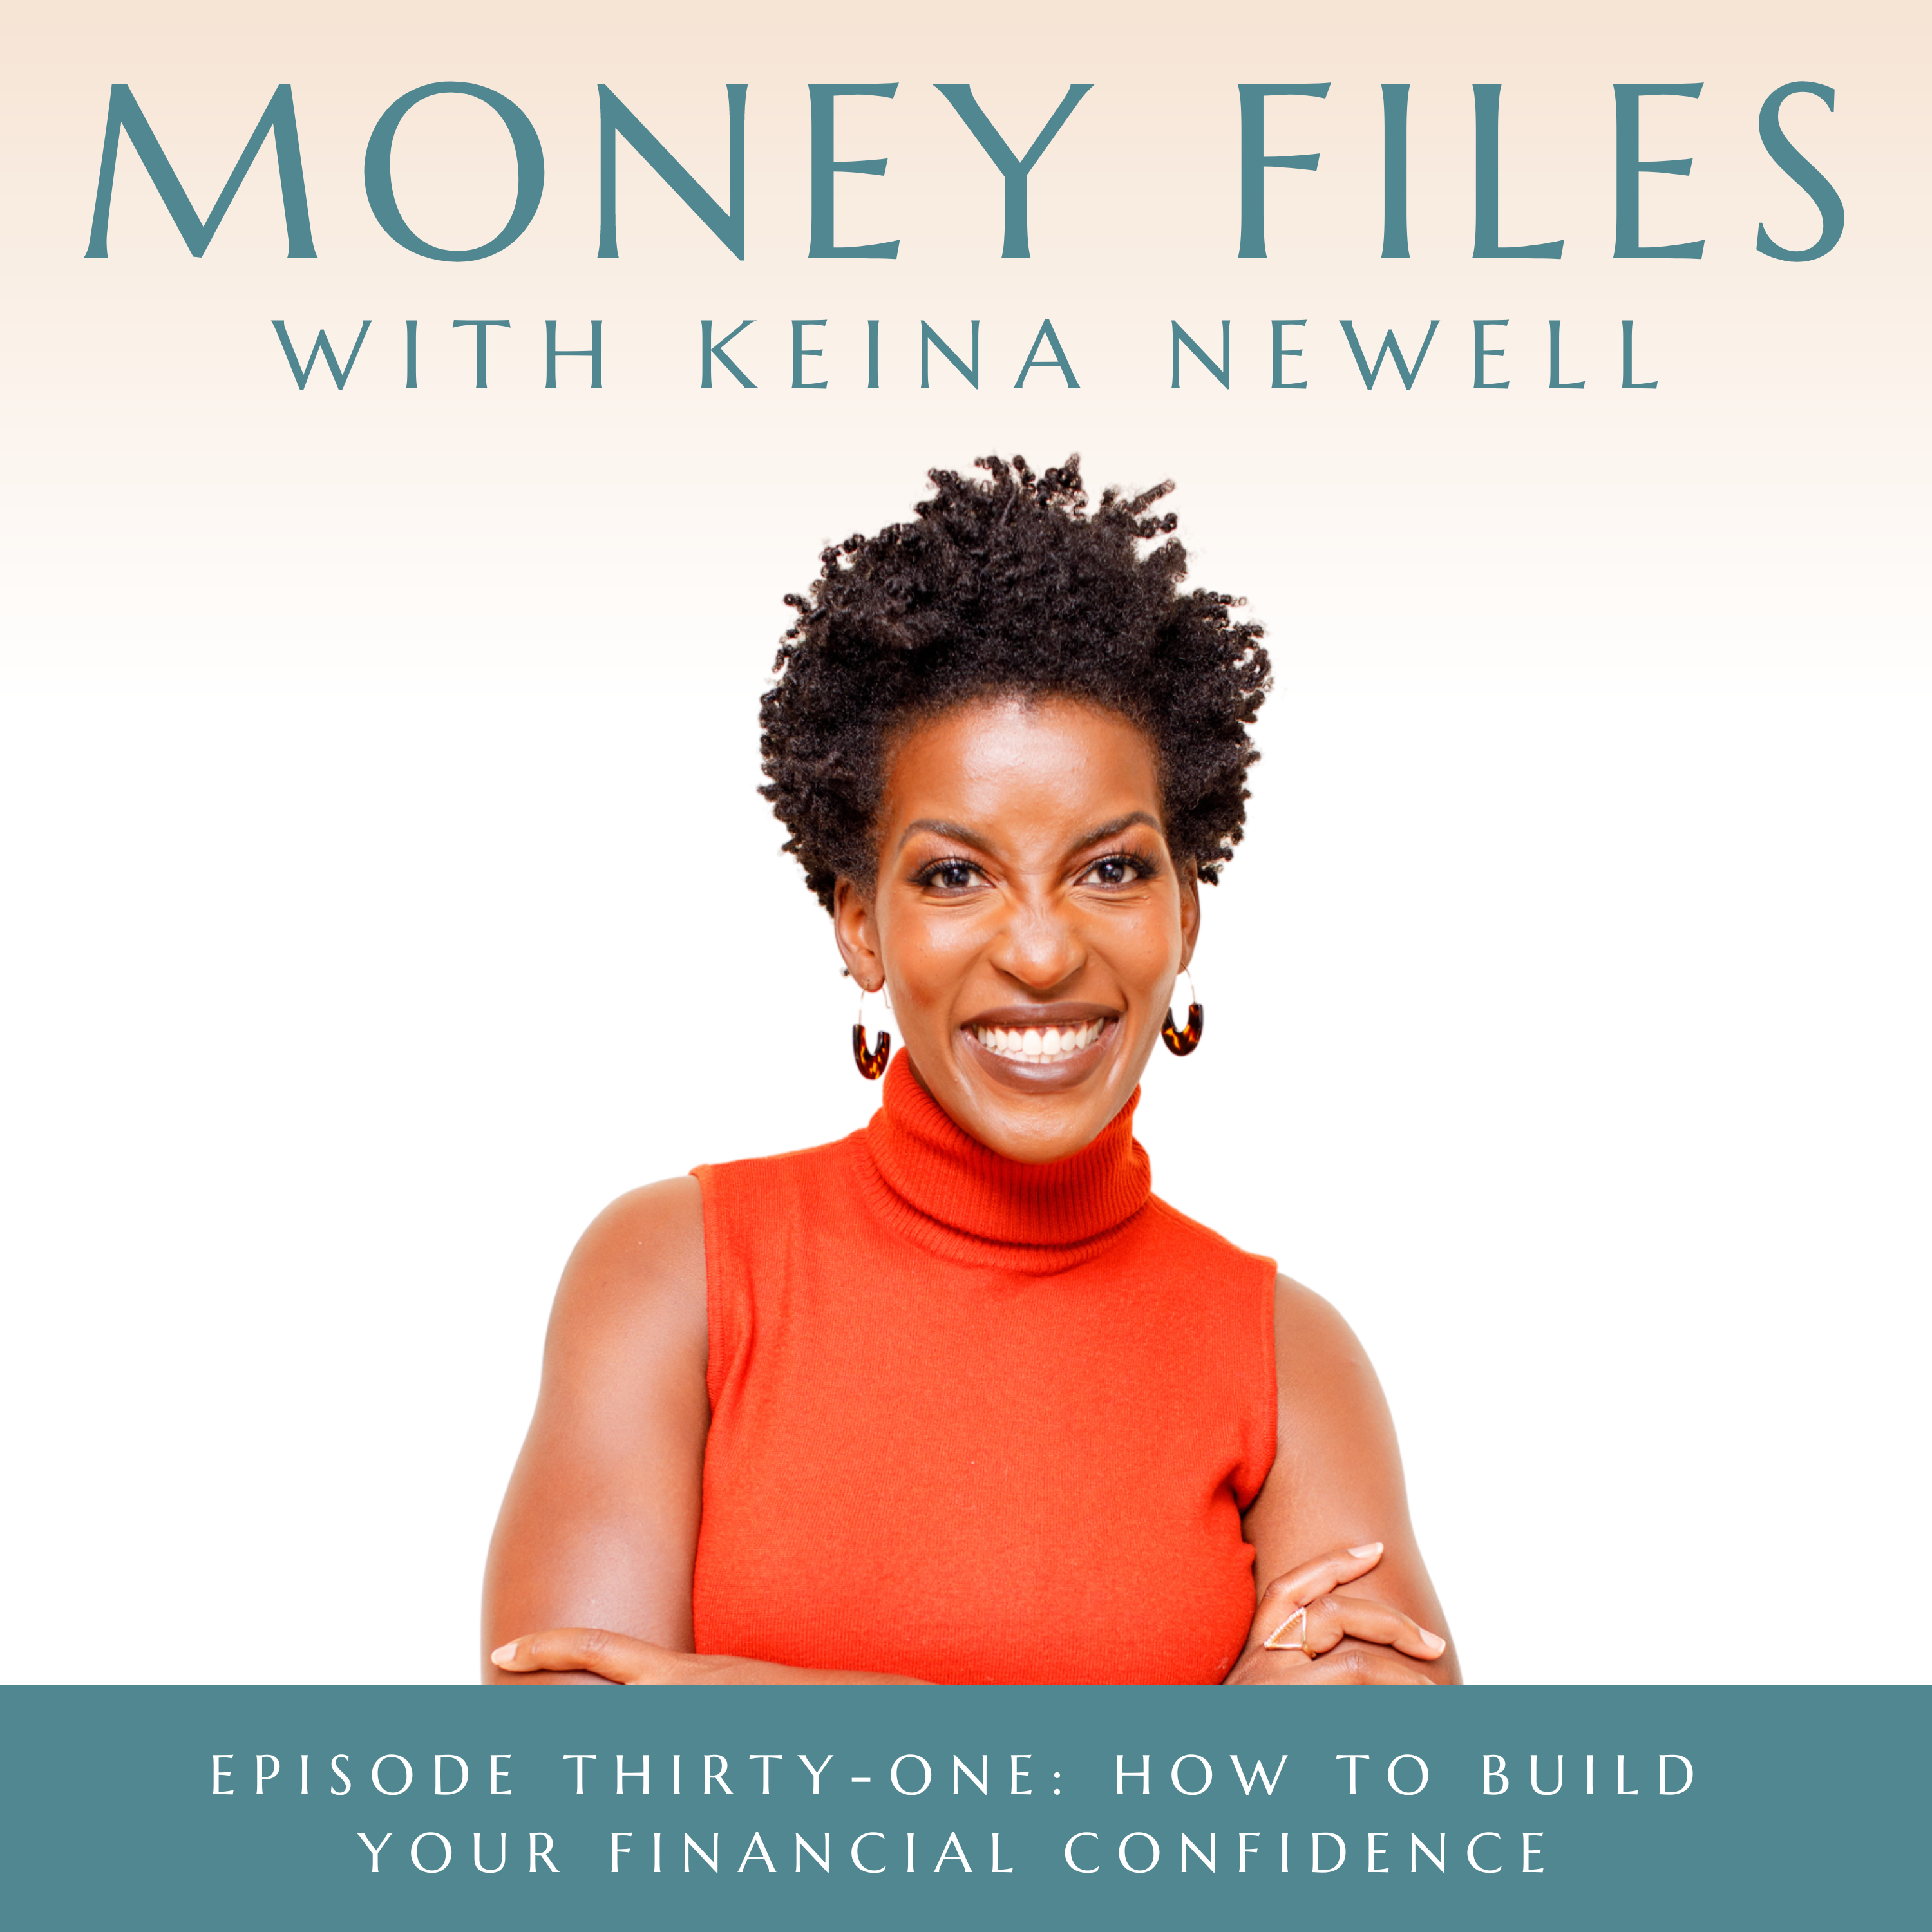 How to Build Your Financial Confidence